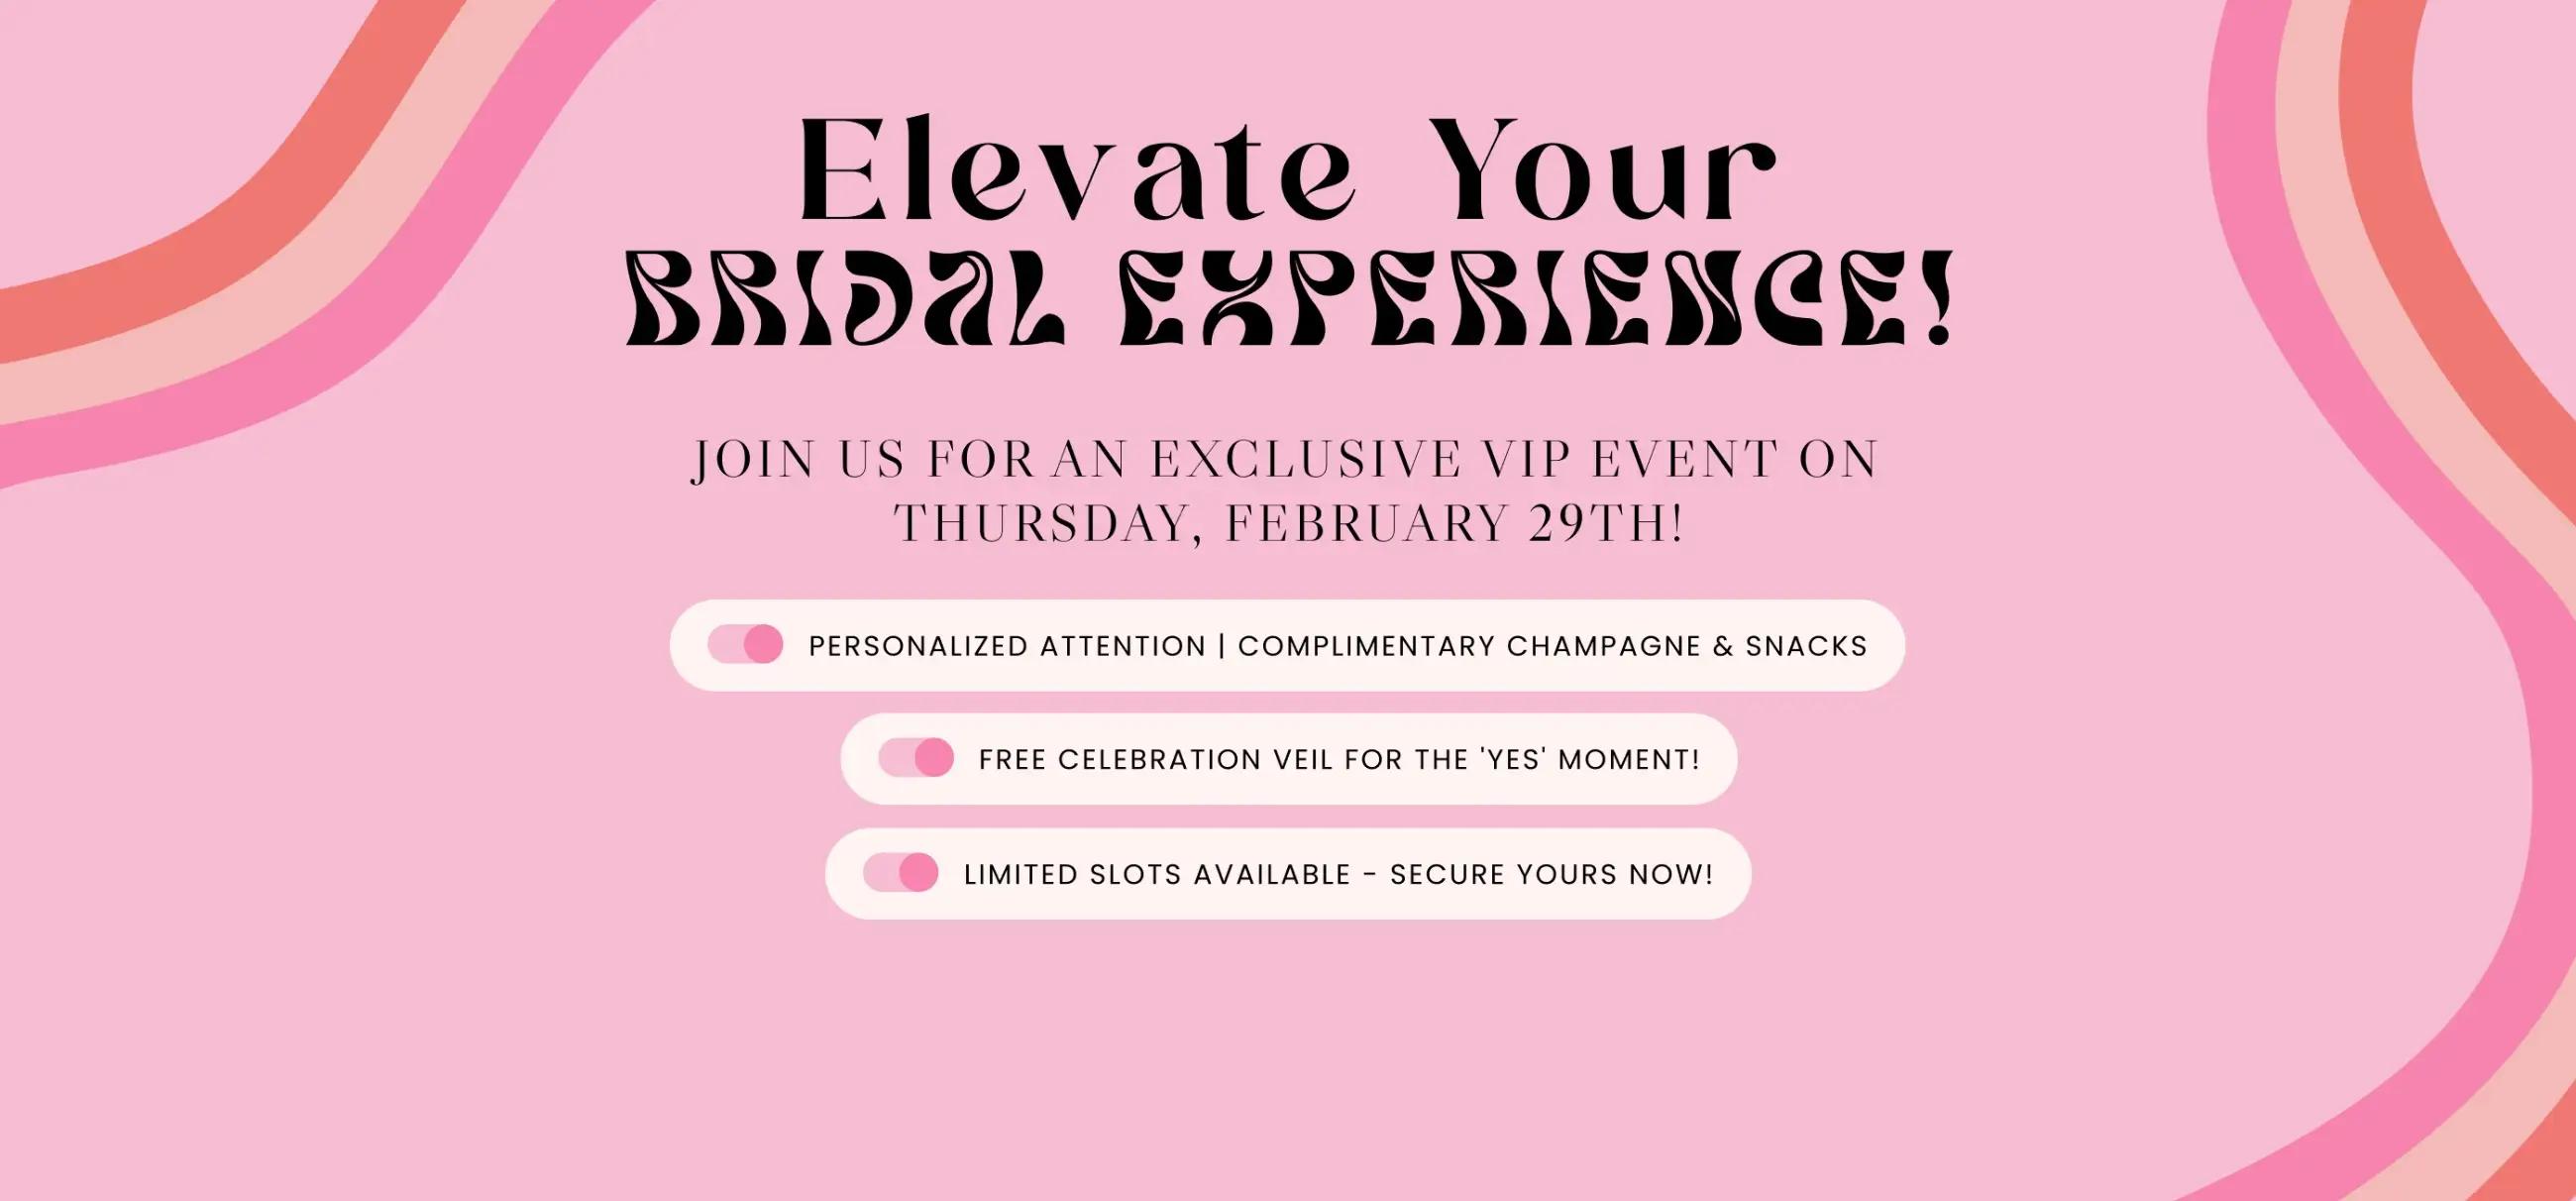 Join Us for an Exclusive VIP Event on Thursday, February 29th!